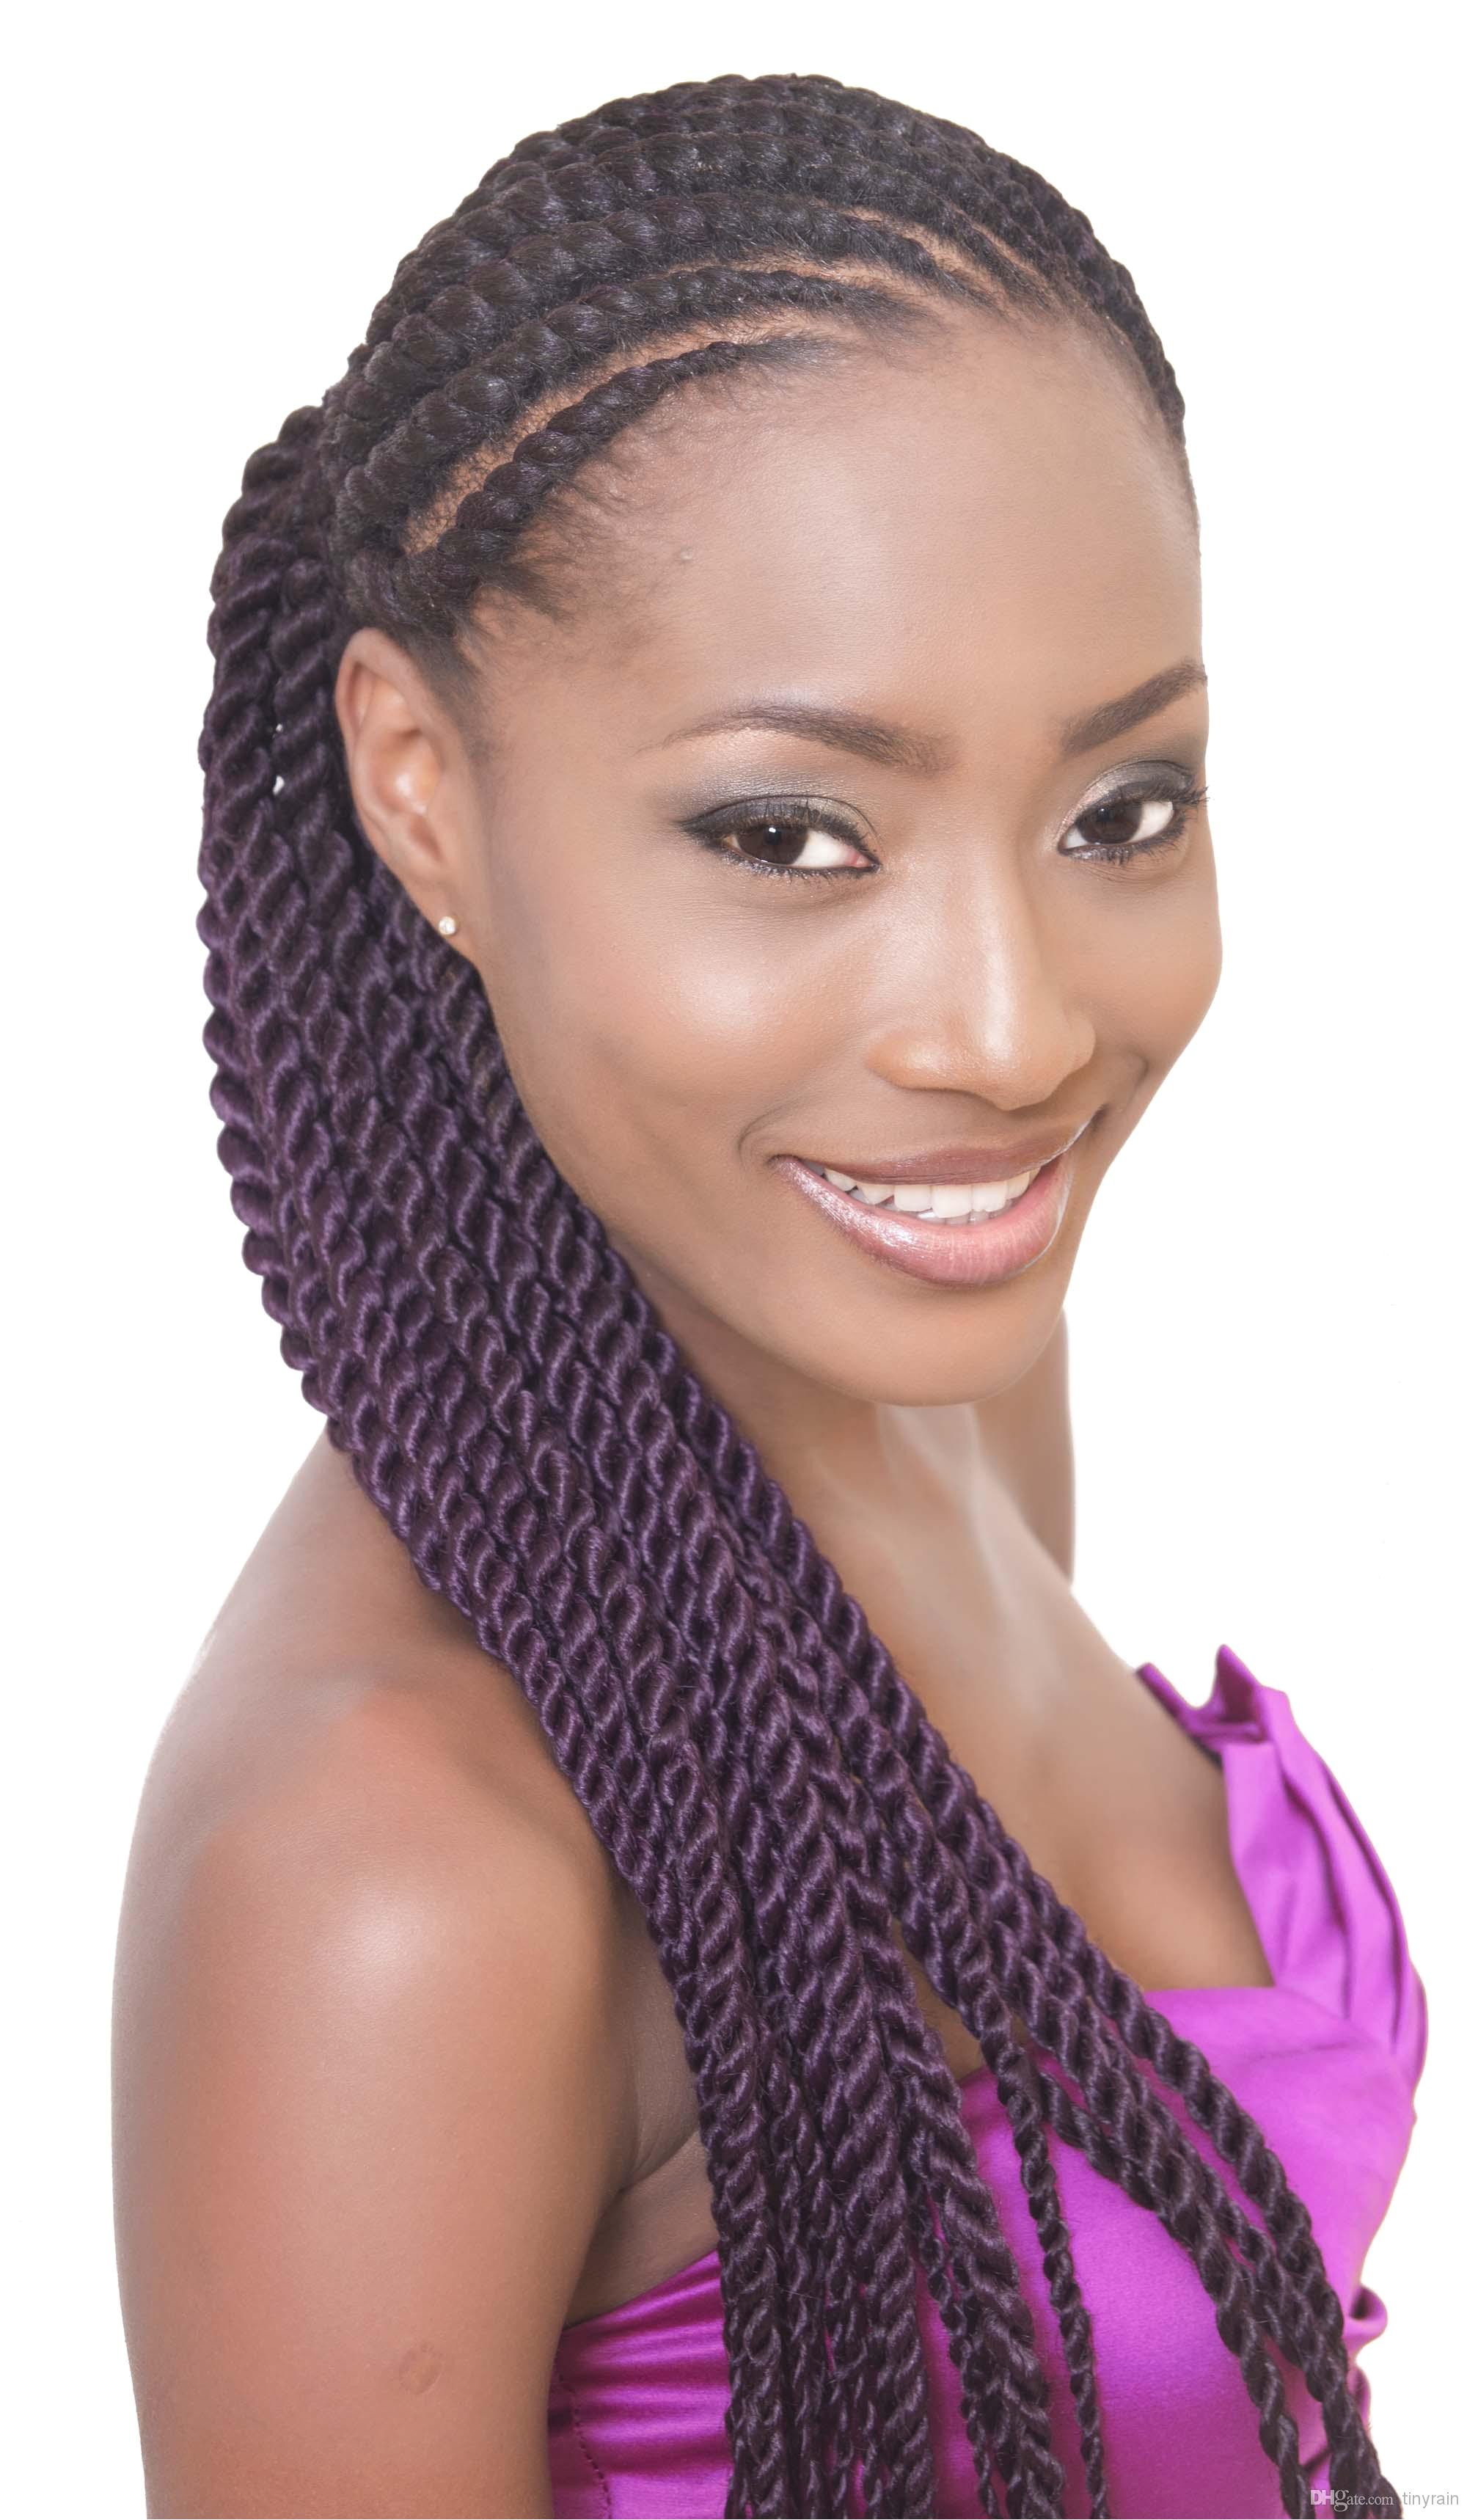 Kanekalon Hair Ultra Braid 82inch 165g Xp Style Jumbo Braid For Twist Uk Usa Canada Local Delivery Fashion Wig It Tress Wigs From Tinyrain $221 11 Dhgate